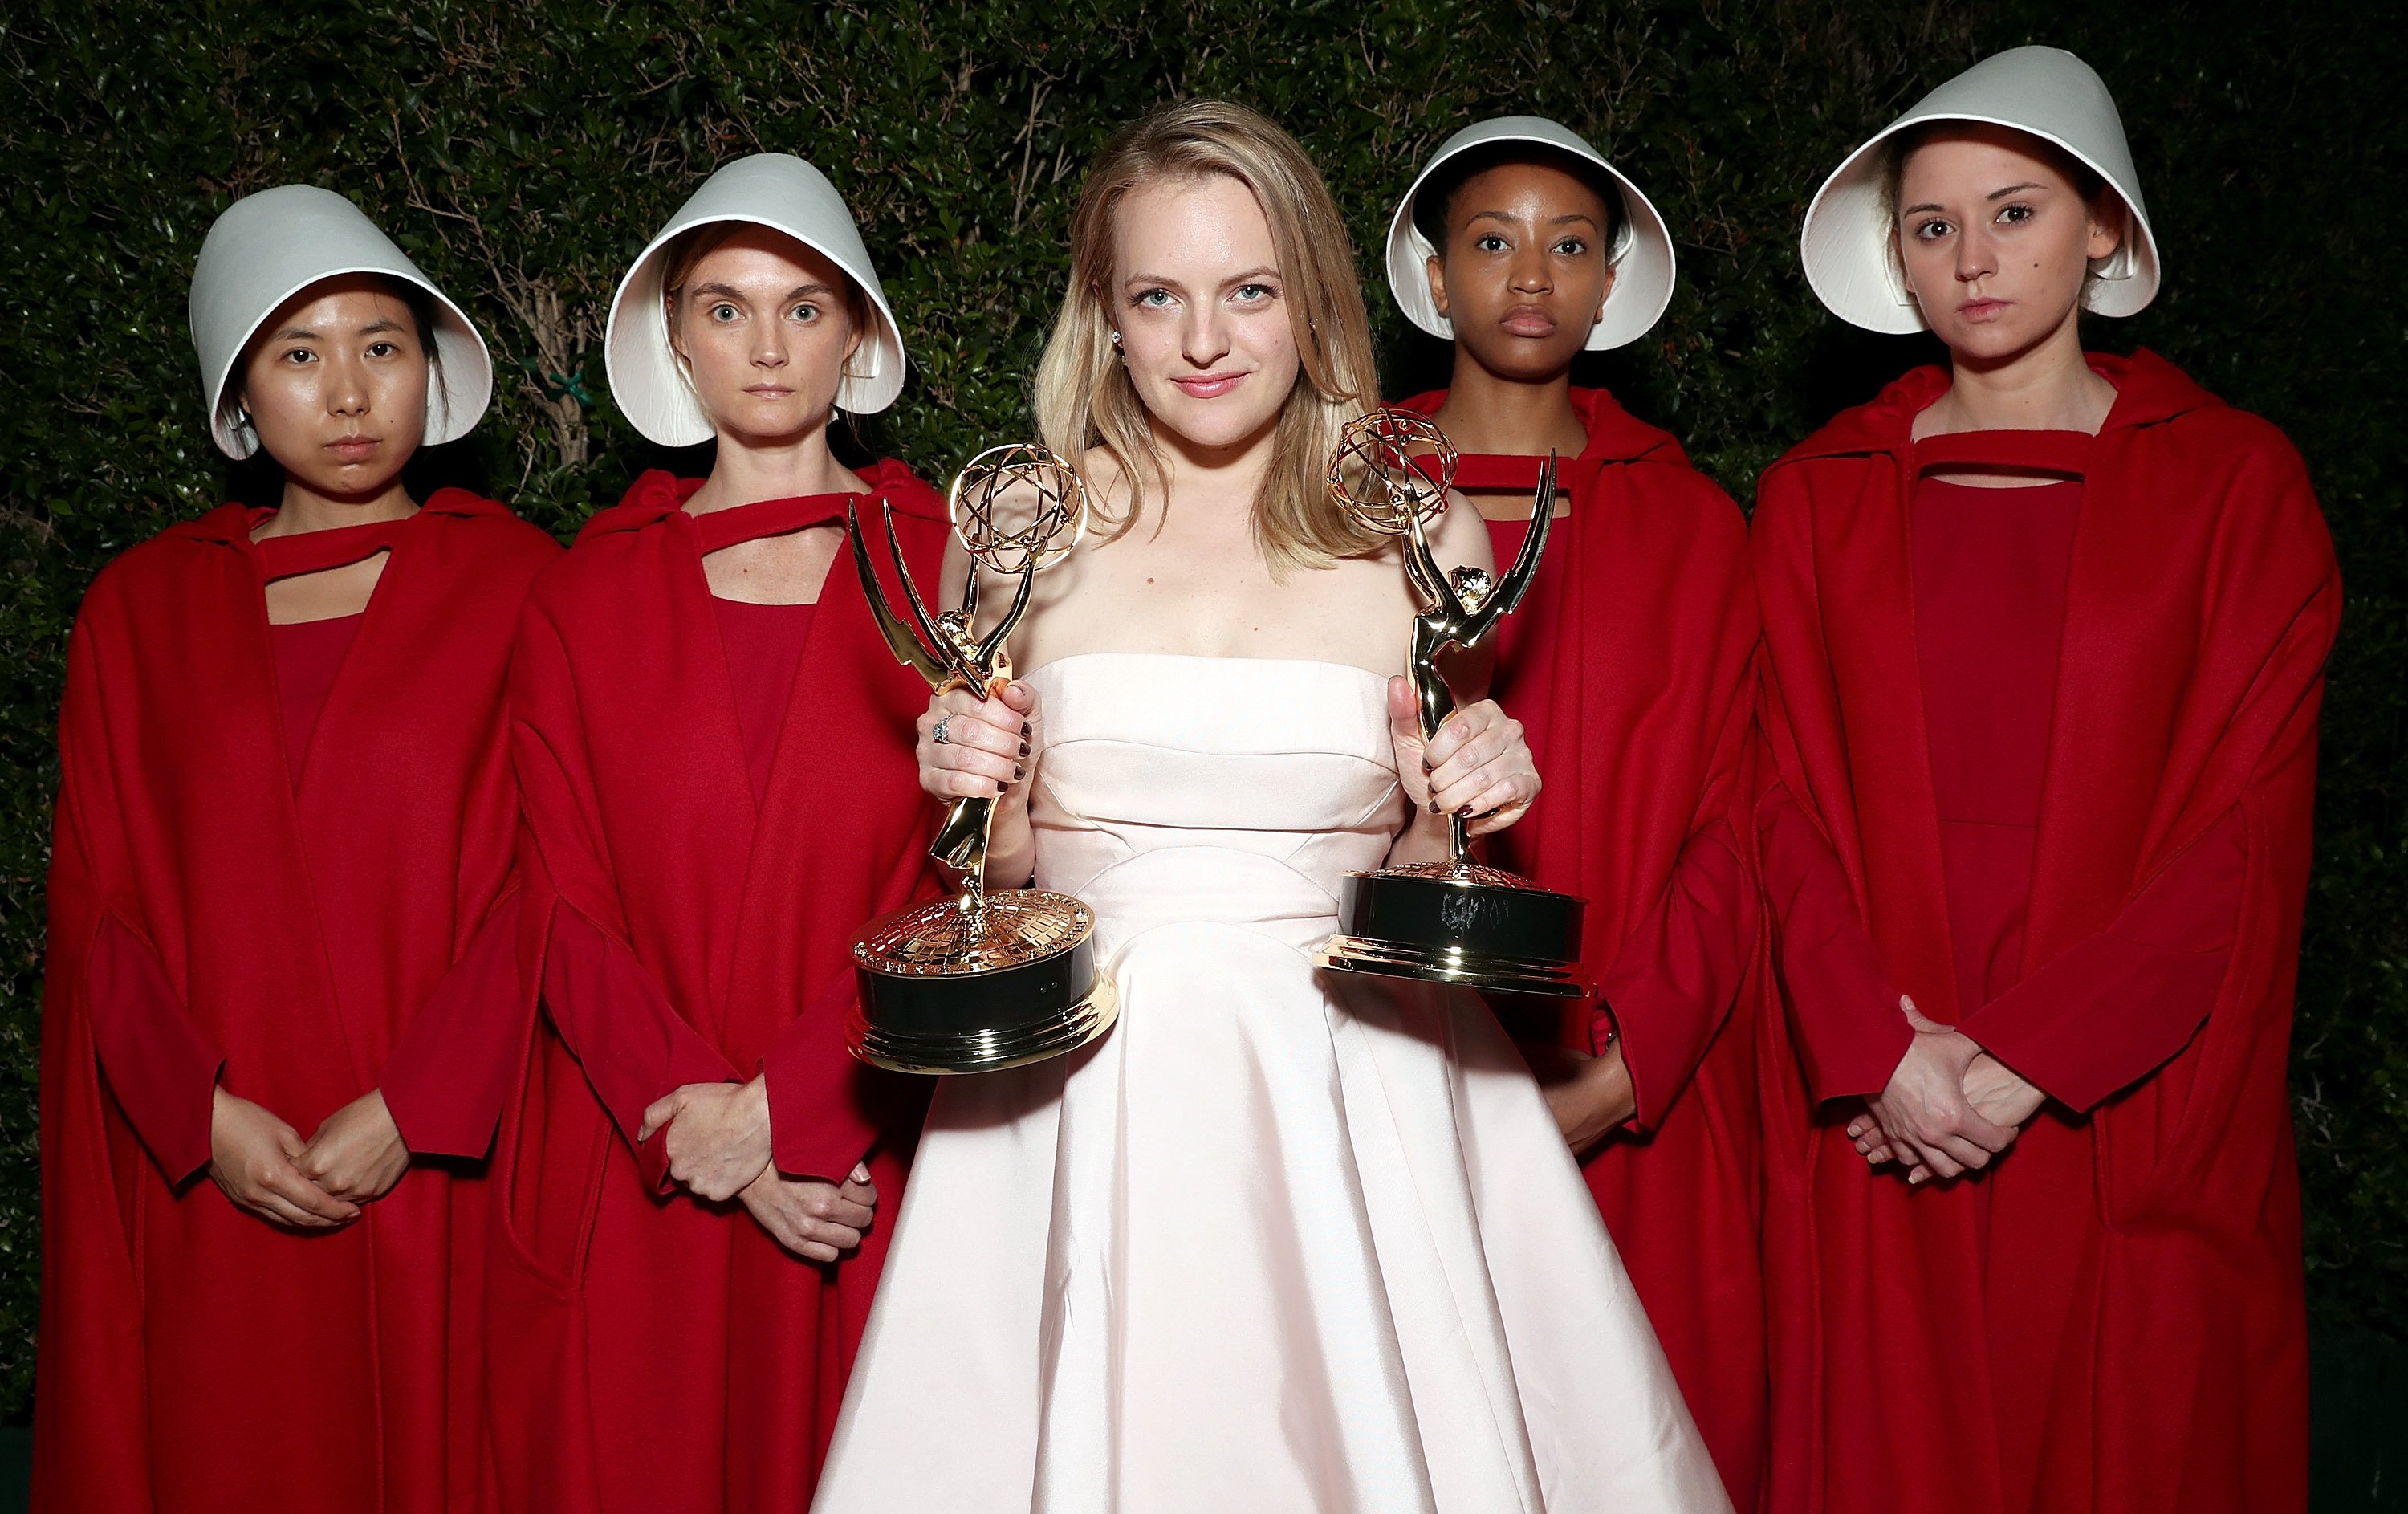 Elisabeth Moss with awards surrounded by women dressed in Handmaid's Tale outfits